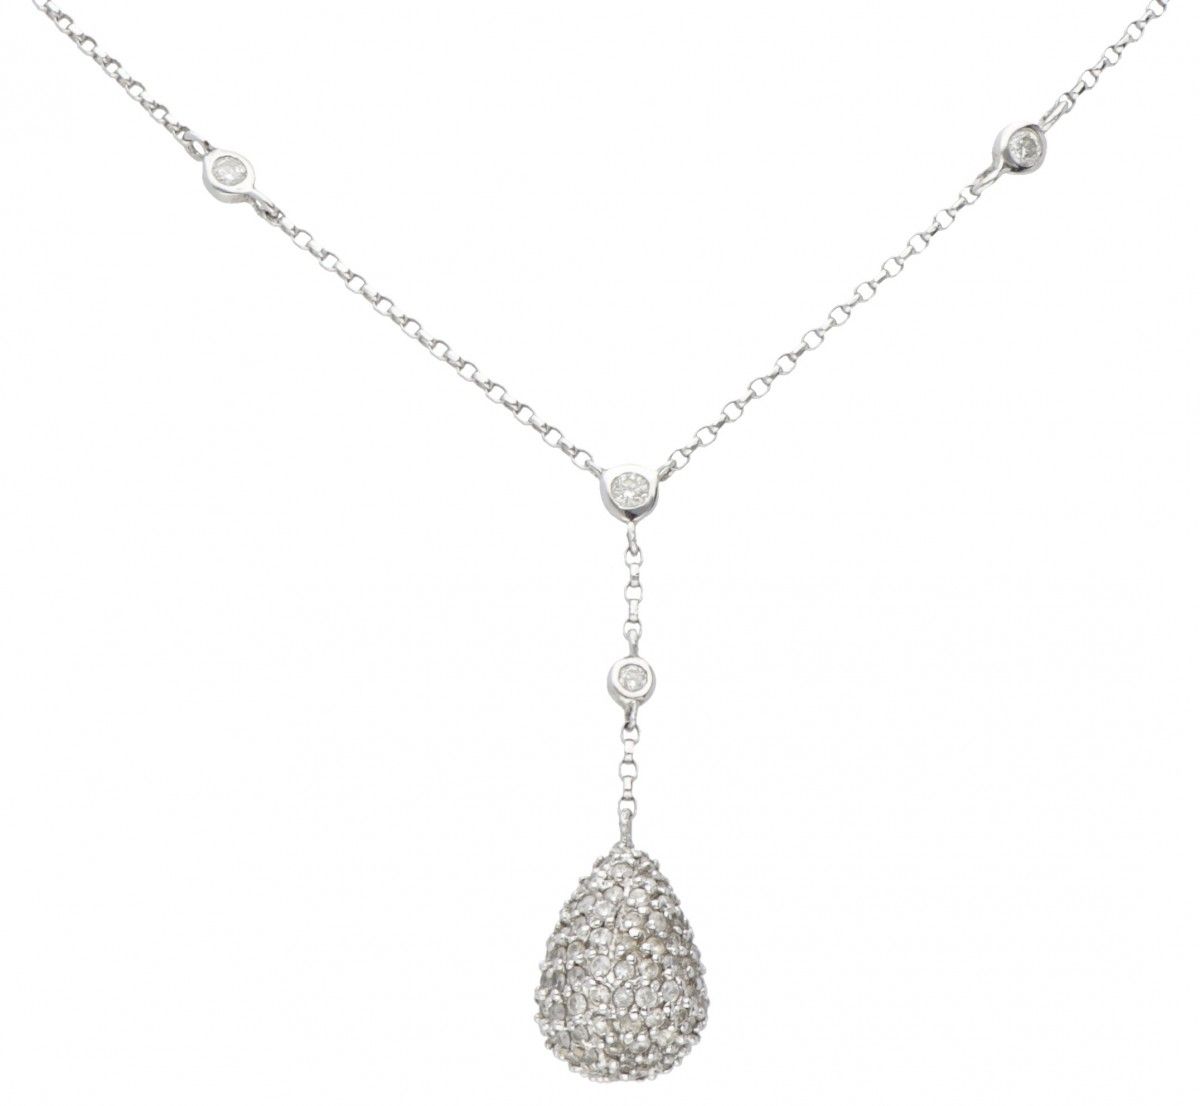 18K. White gold necklace with a teardrop-shaped pendant and set with approx. 0.8&hellip;